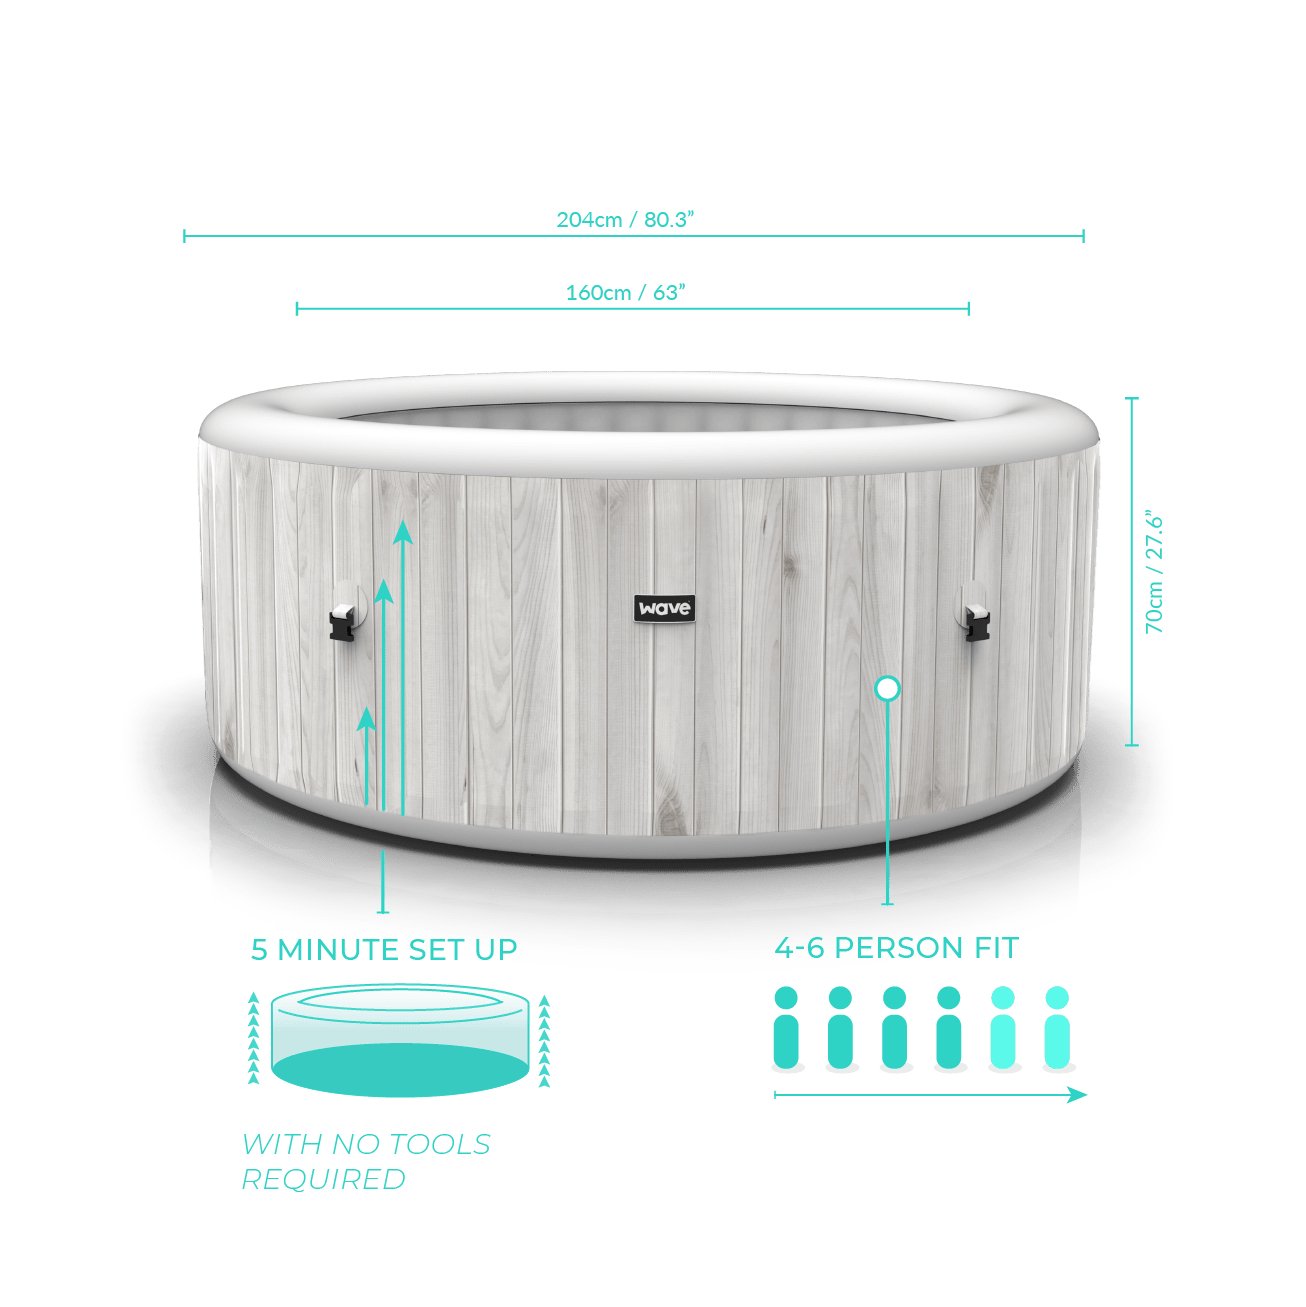 Wave Spa 6 Person White Wood External Liner - Body Replacement - Wave Spas Inflatable, foam Hot Tubs